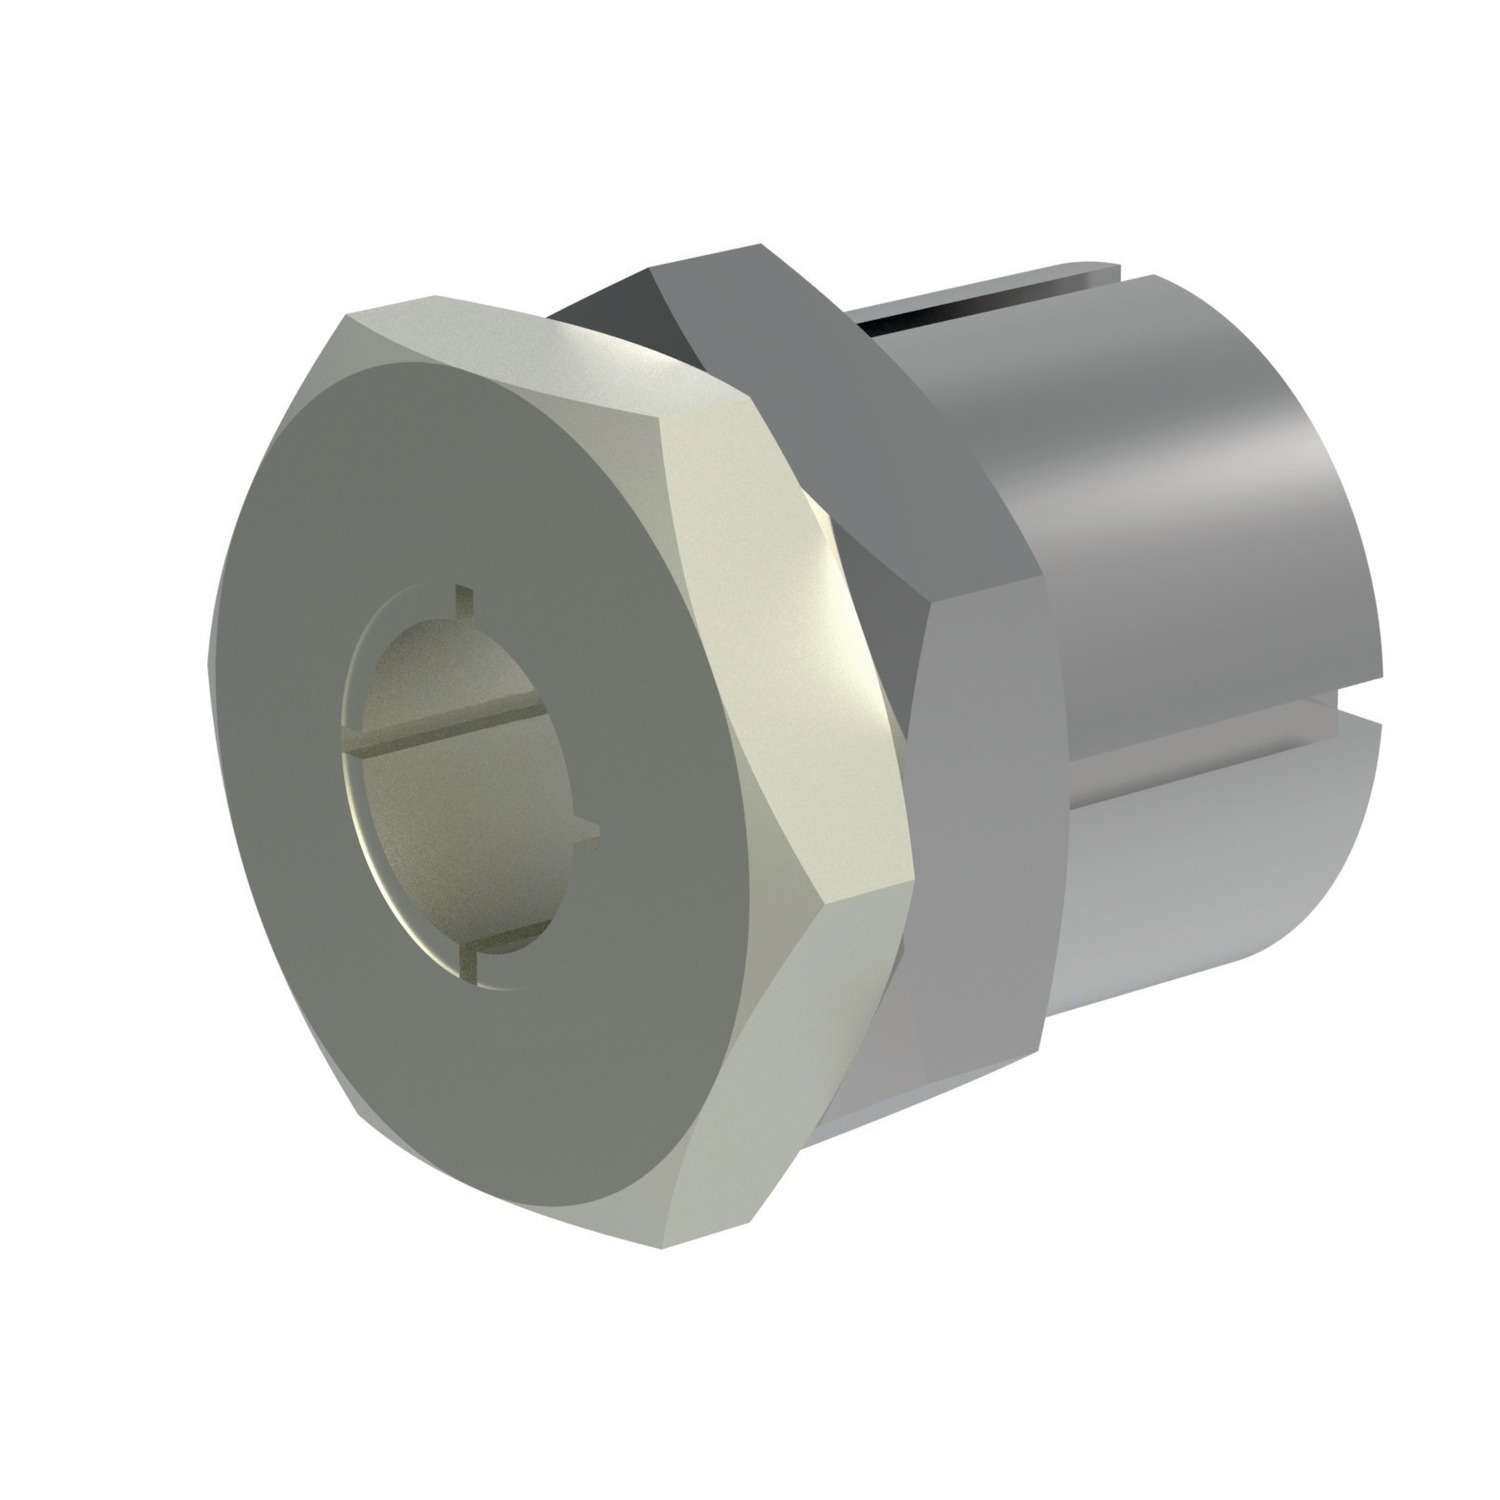 Product R3222, Steel Taper Bushes with lock nut / 